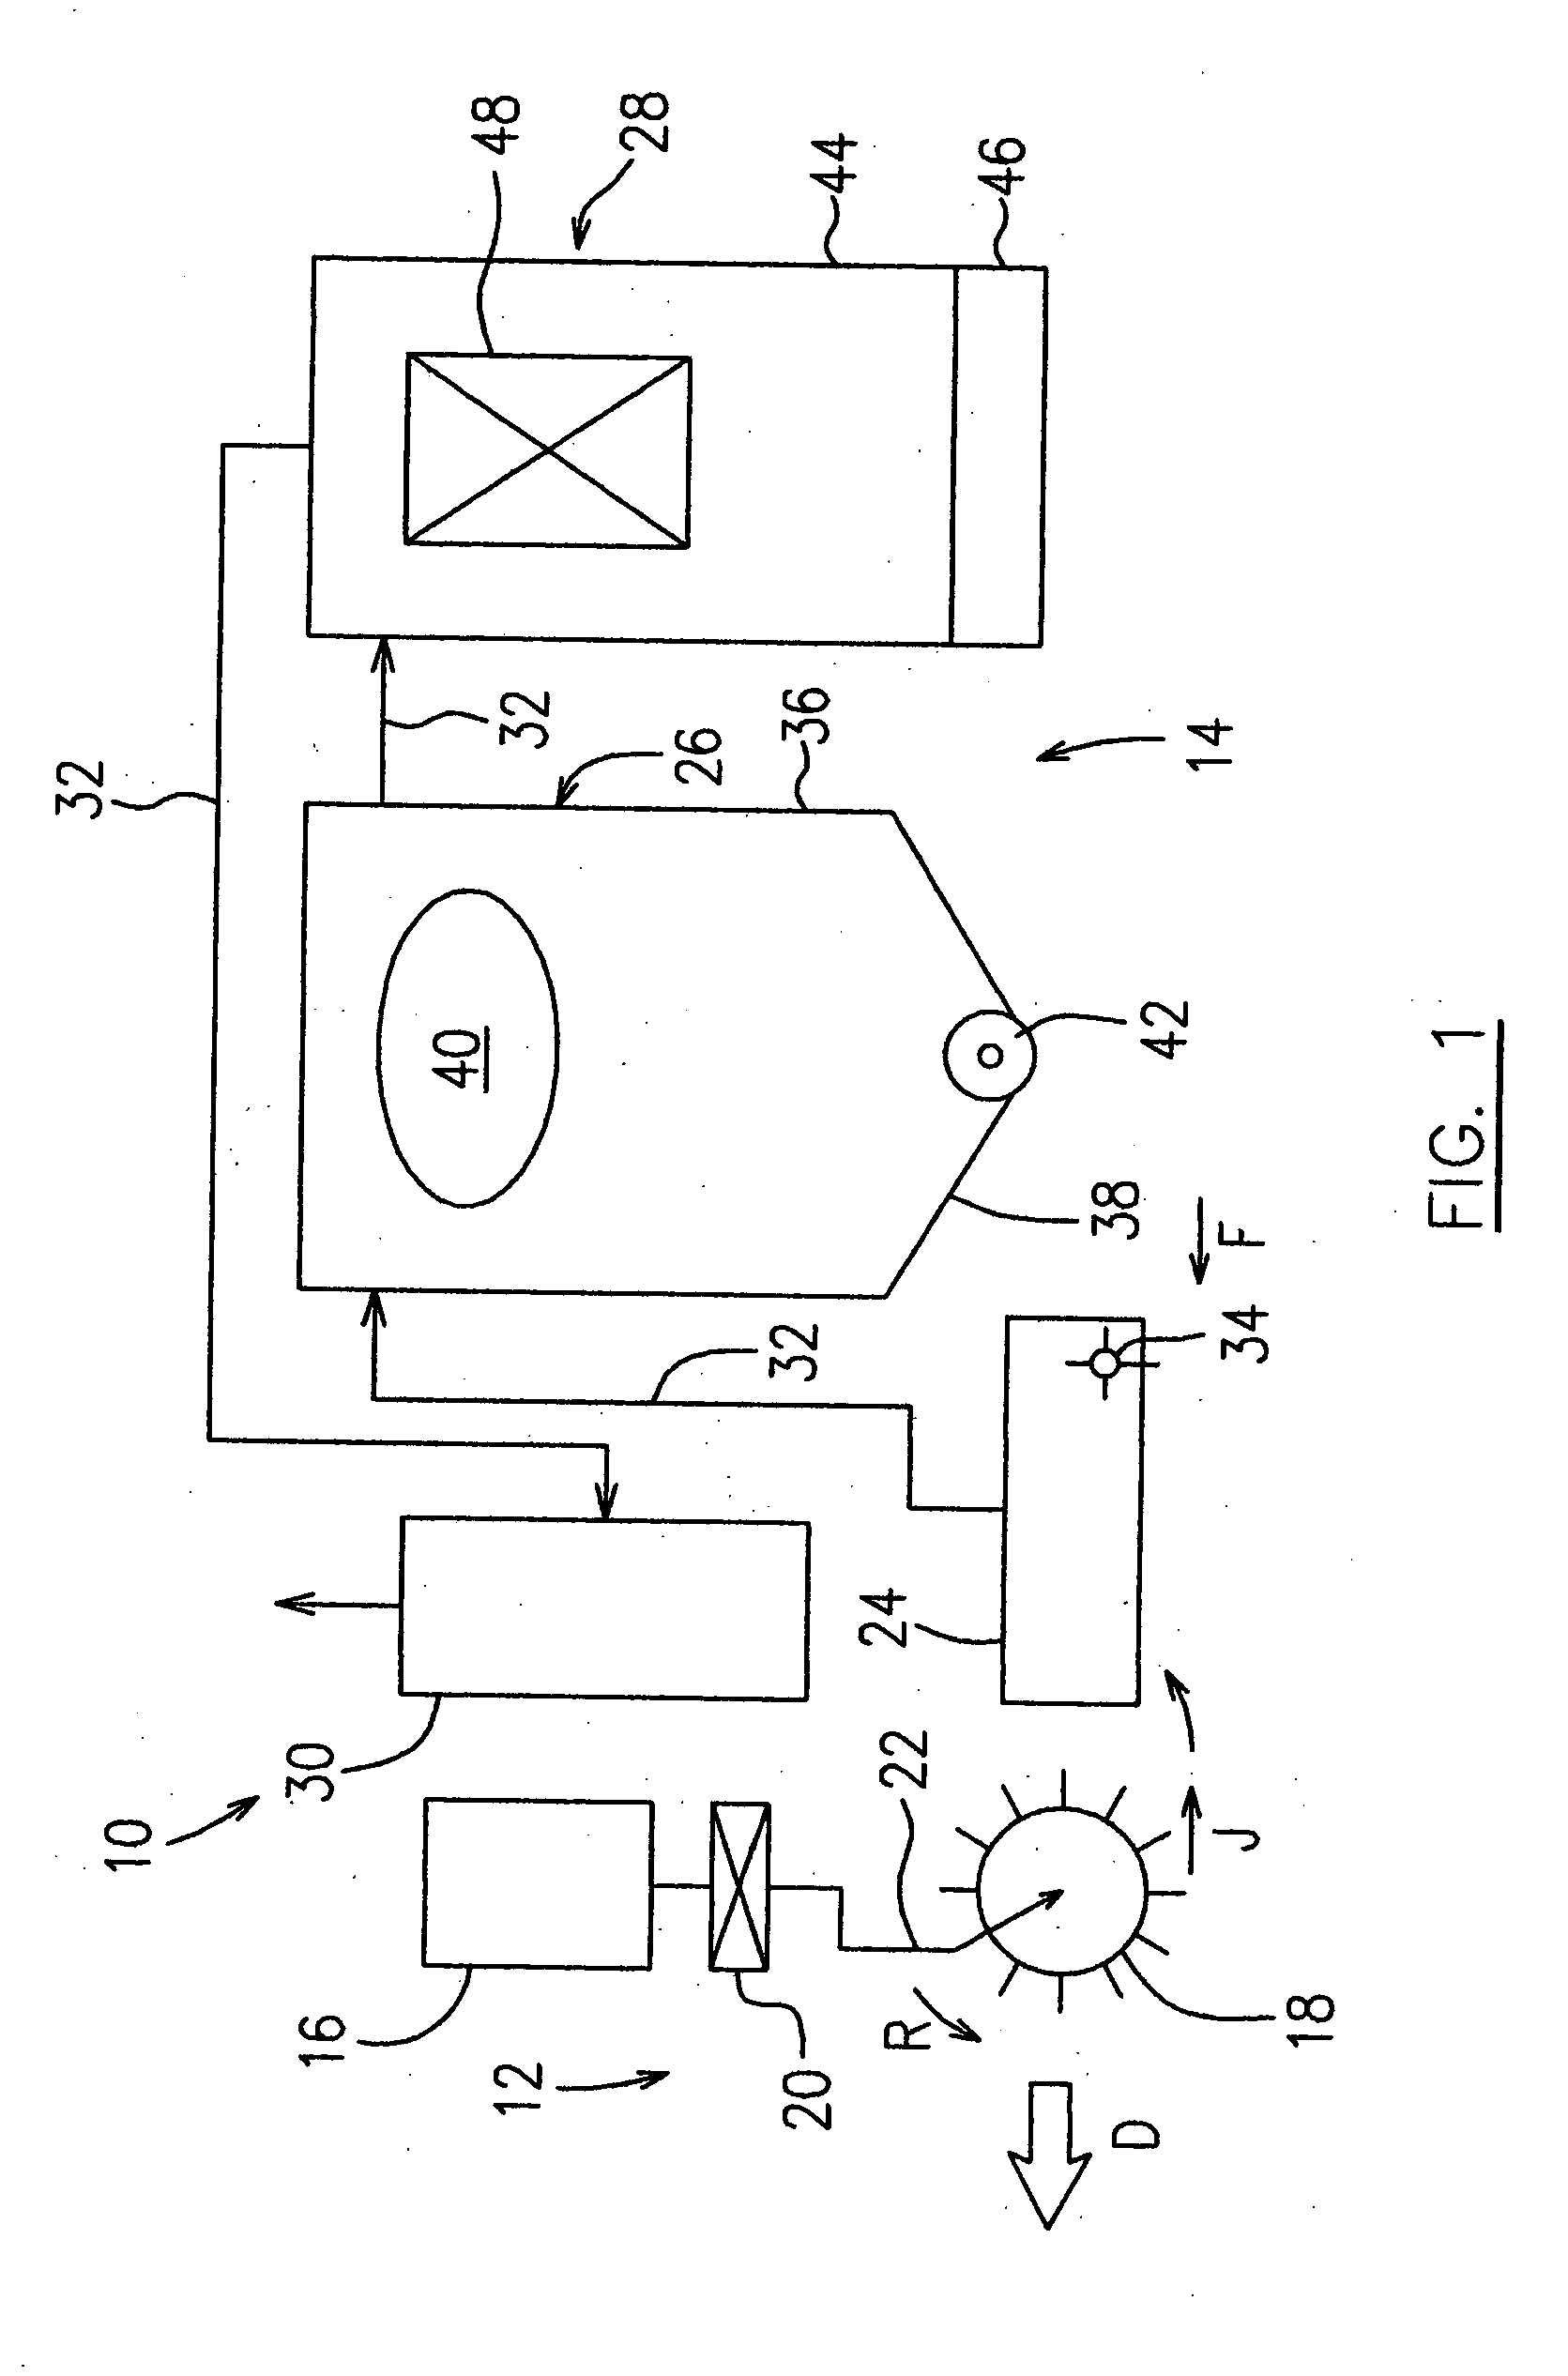 Apparatus and method for treating synthetic grass turf